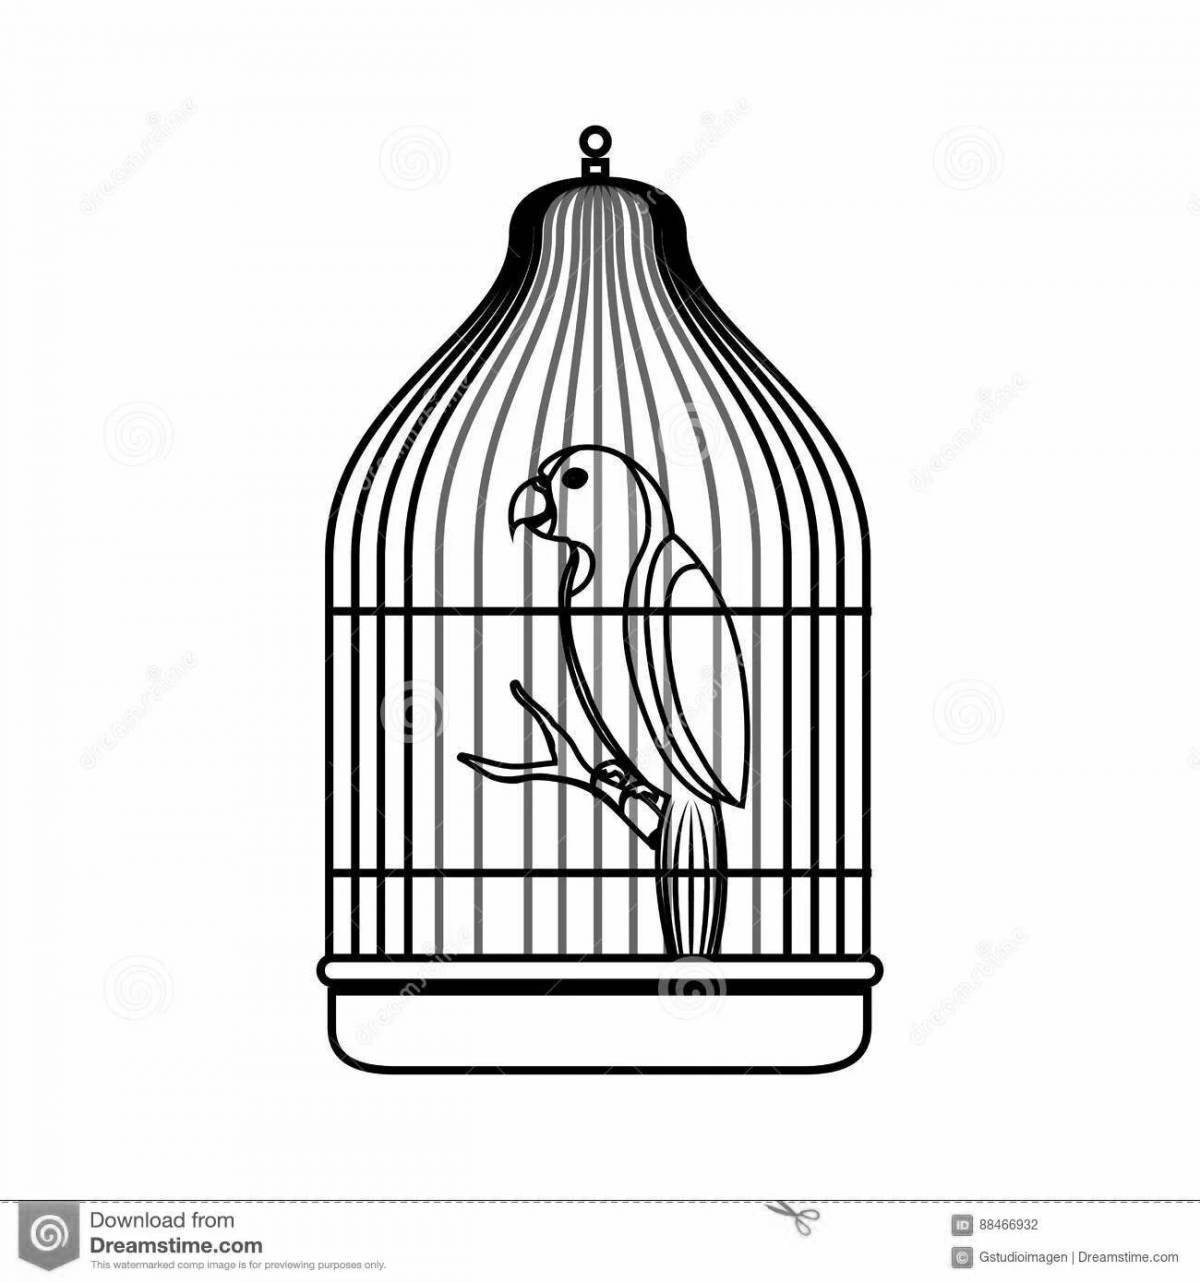 Delightful caged parrot